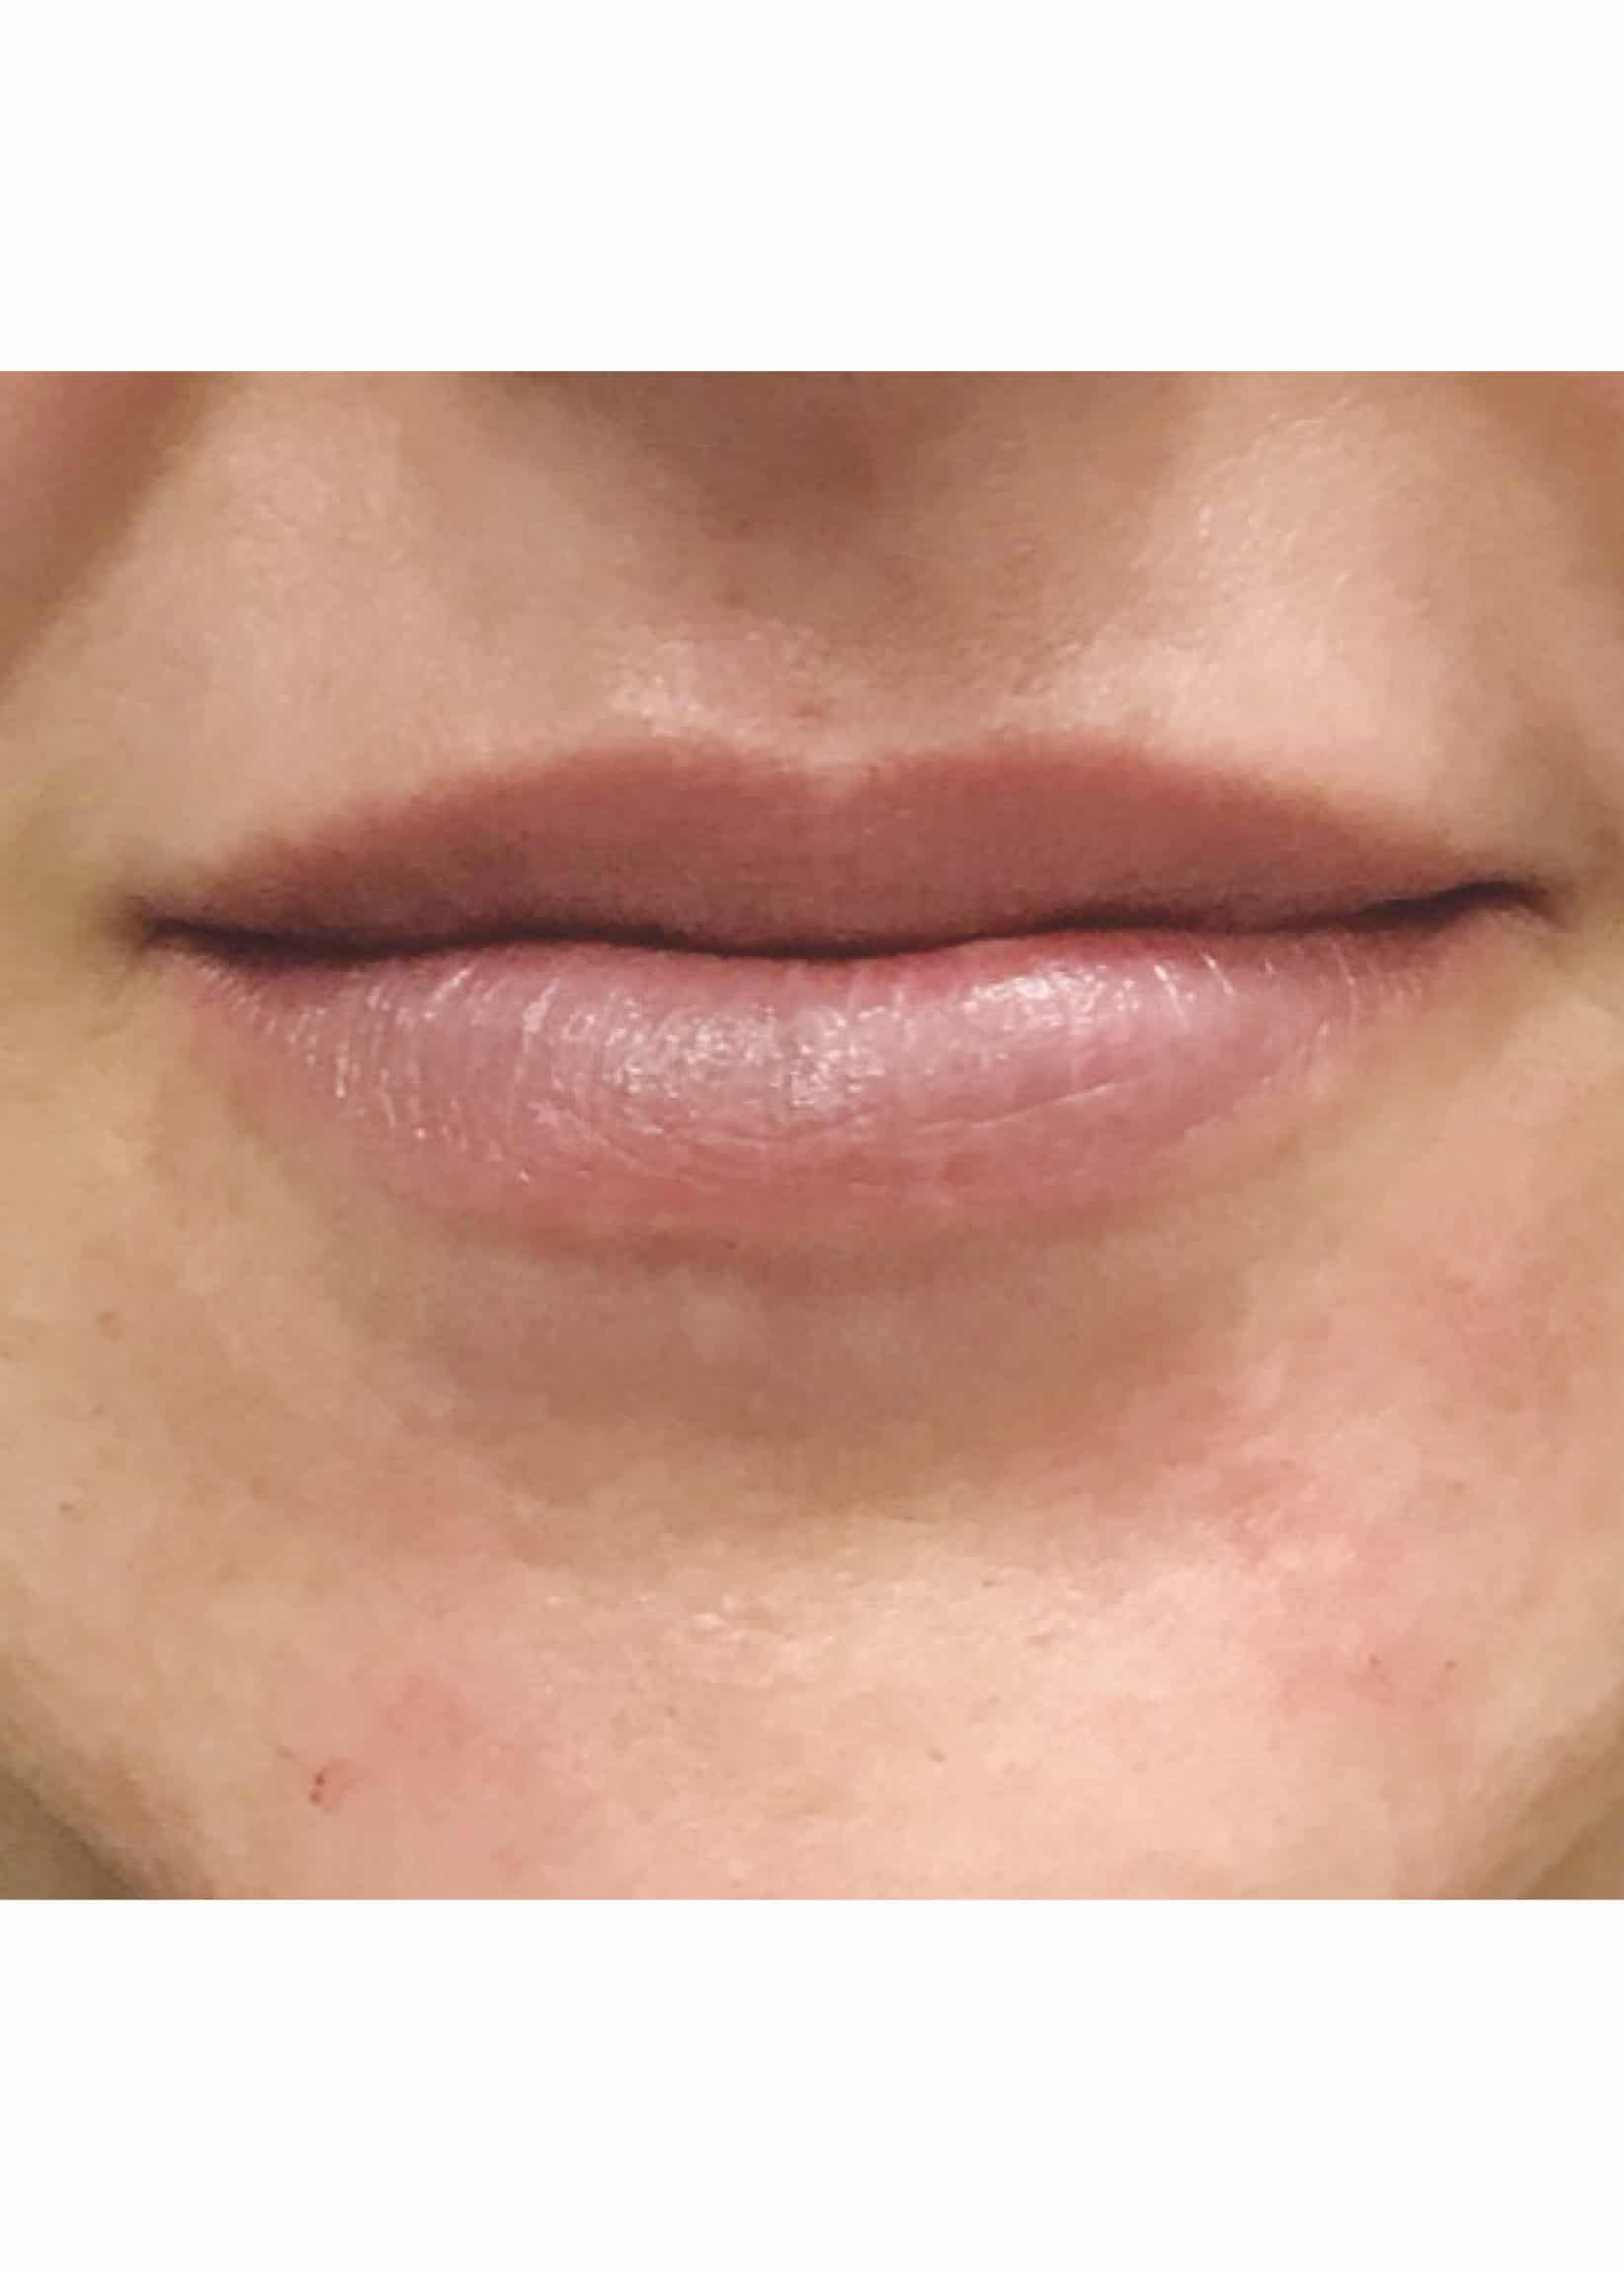 TheSkinCenter ProviderPages JonnaBlum LipFiller Before 5 scaled 1